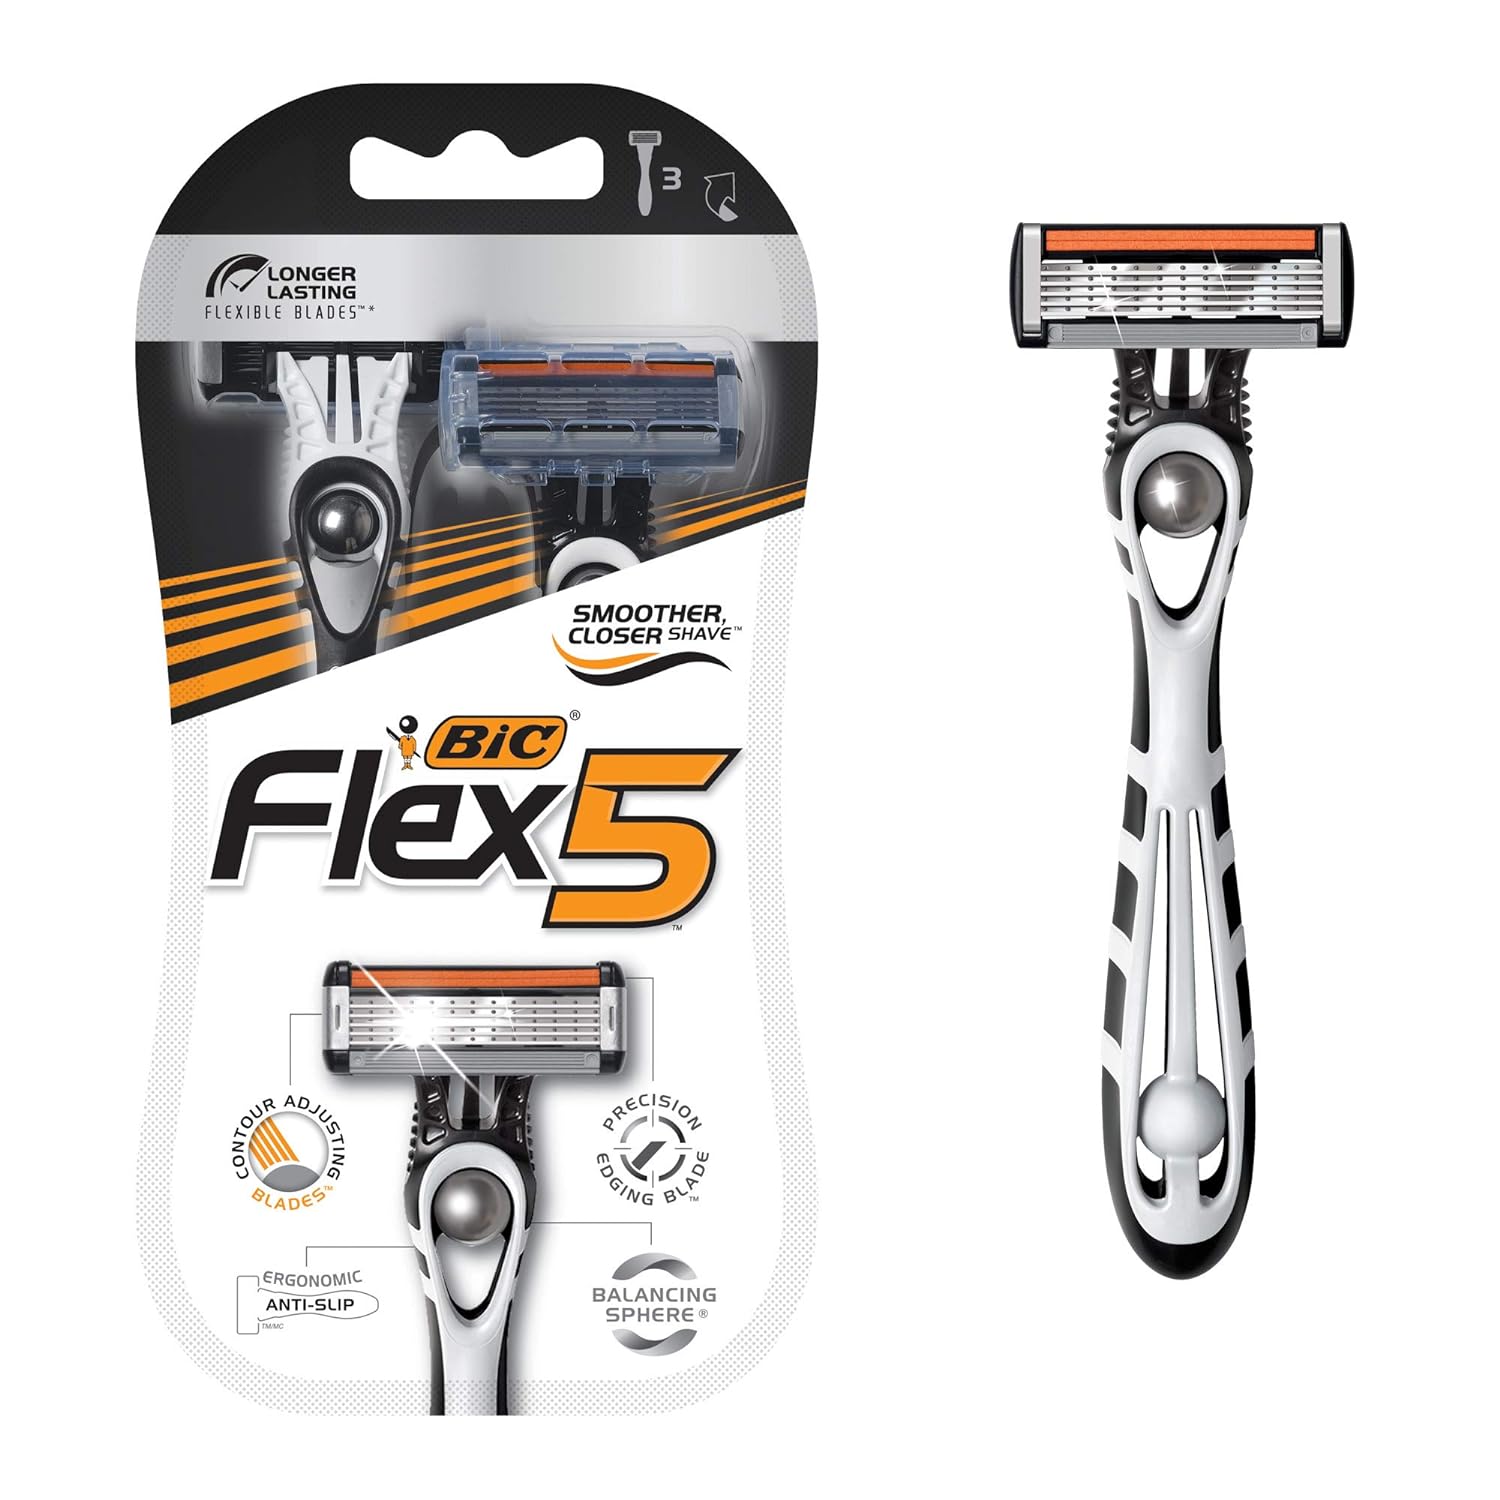 These are my favorite disposable razors. They give me a really close shave, and it' always comfortable. The head pivots easily to follow the contours of my face, the blades are wide so they cover a wide swath on each stroke (remember to take short strokes and go with the grain of your beard for best results) and the blades are close enough to the rails that I can get in the tight nooks and crannies around my nose. Also, there is a detail blade that you can turn the head over and use to cleanly 